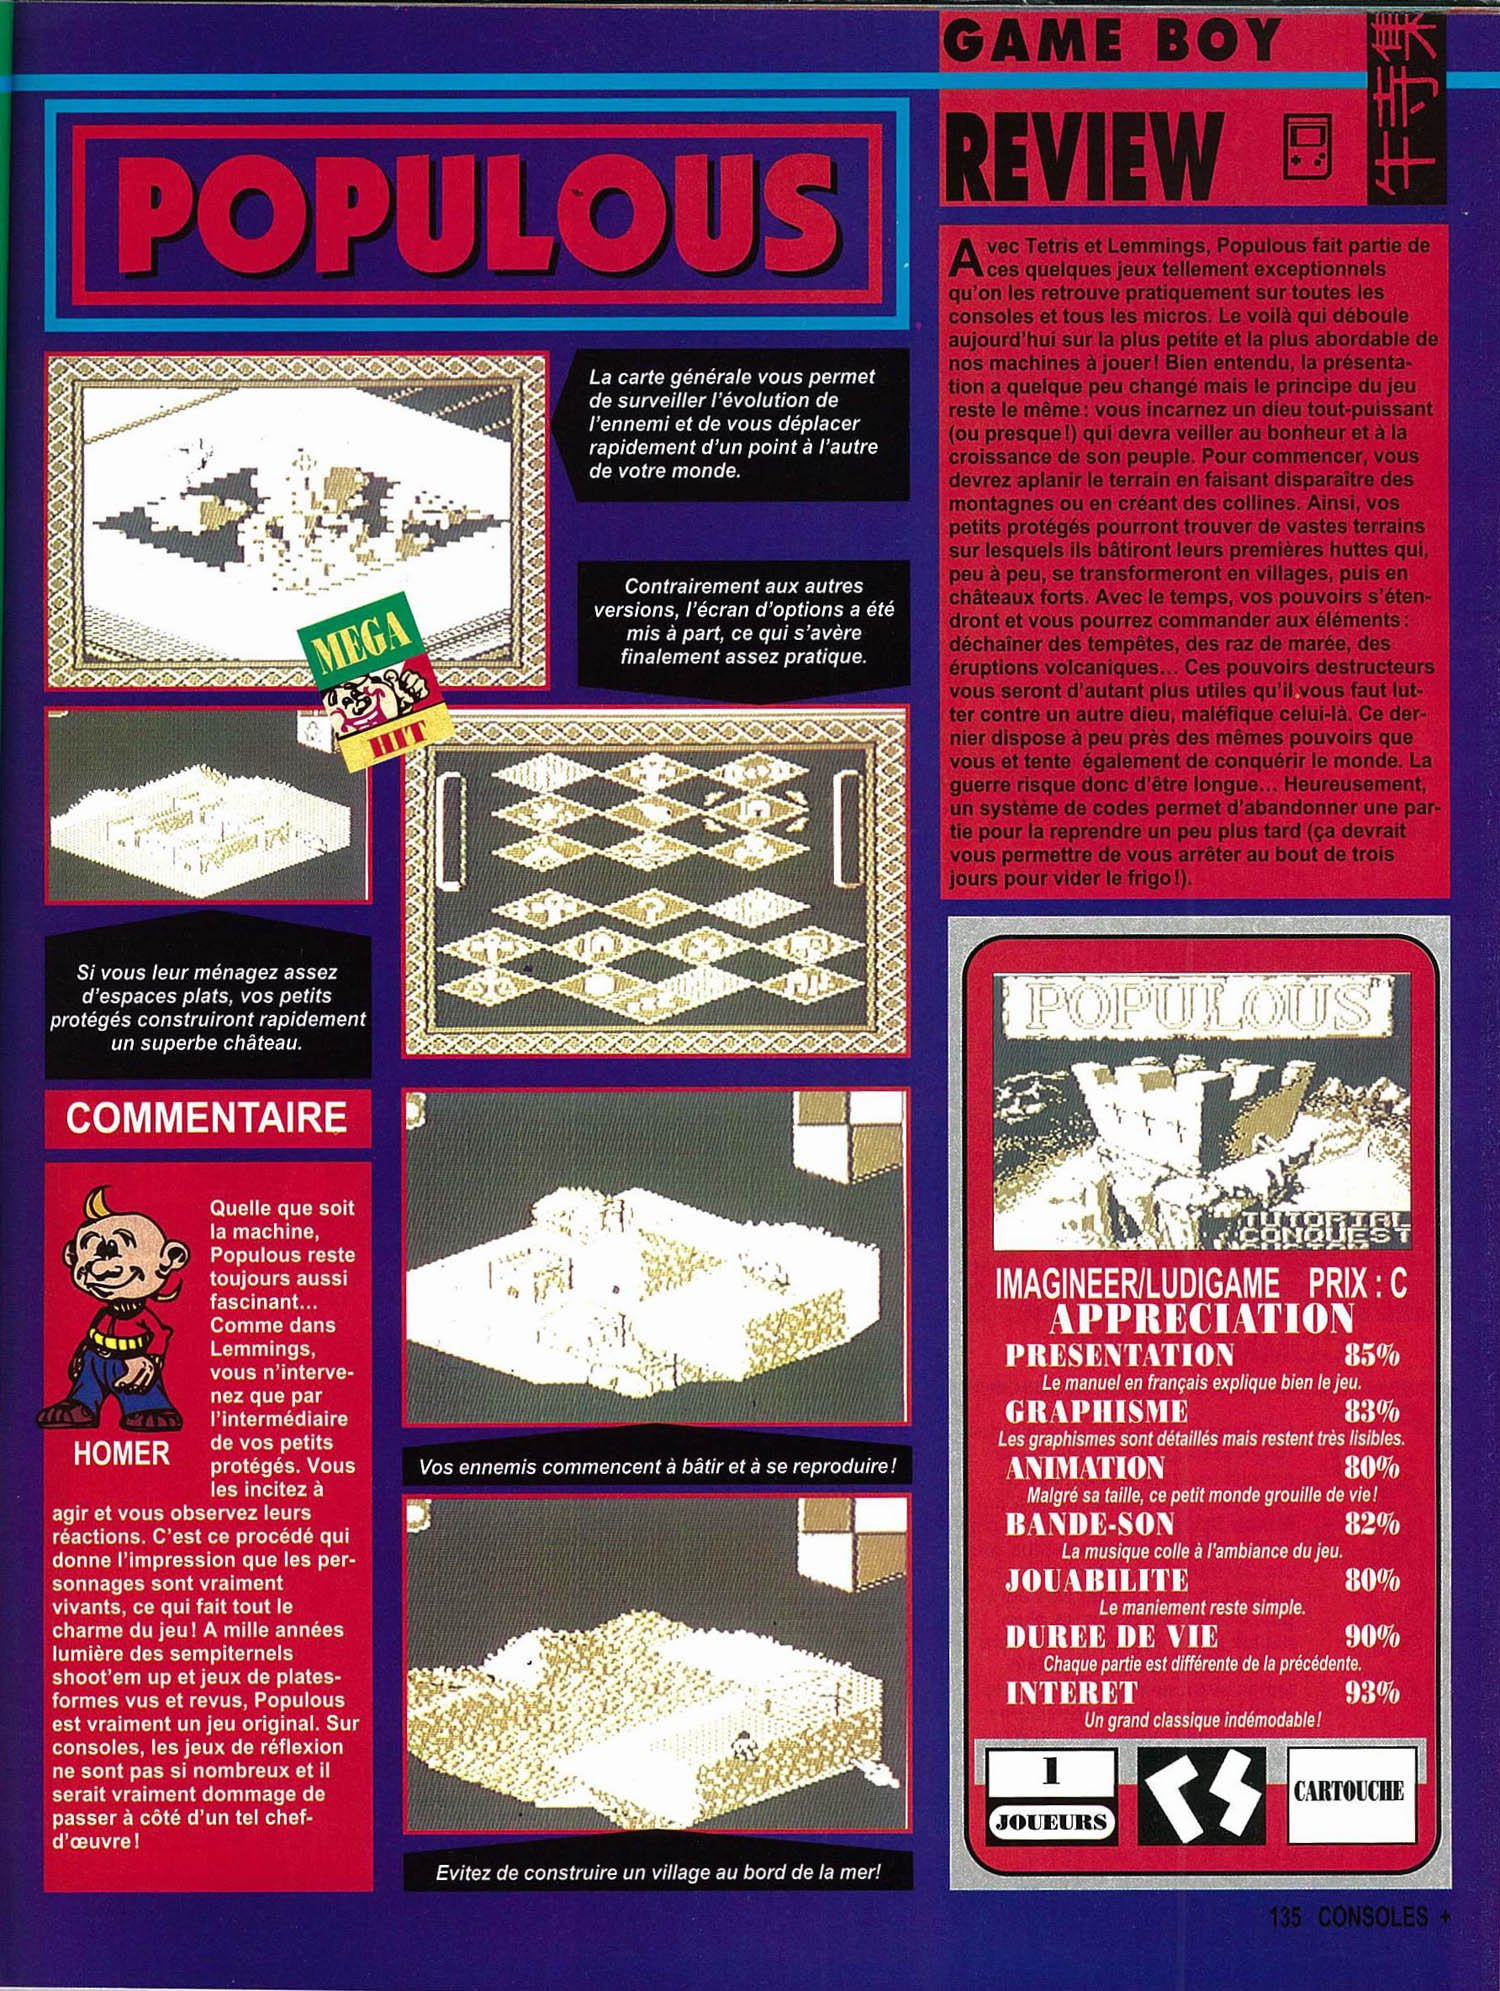 tests//1083/Consoles + 020 - Page 135 (mai 1993).jpg